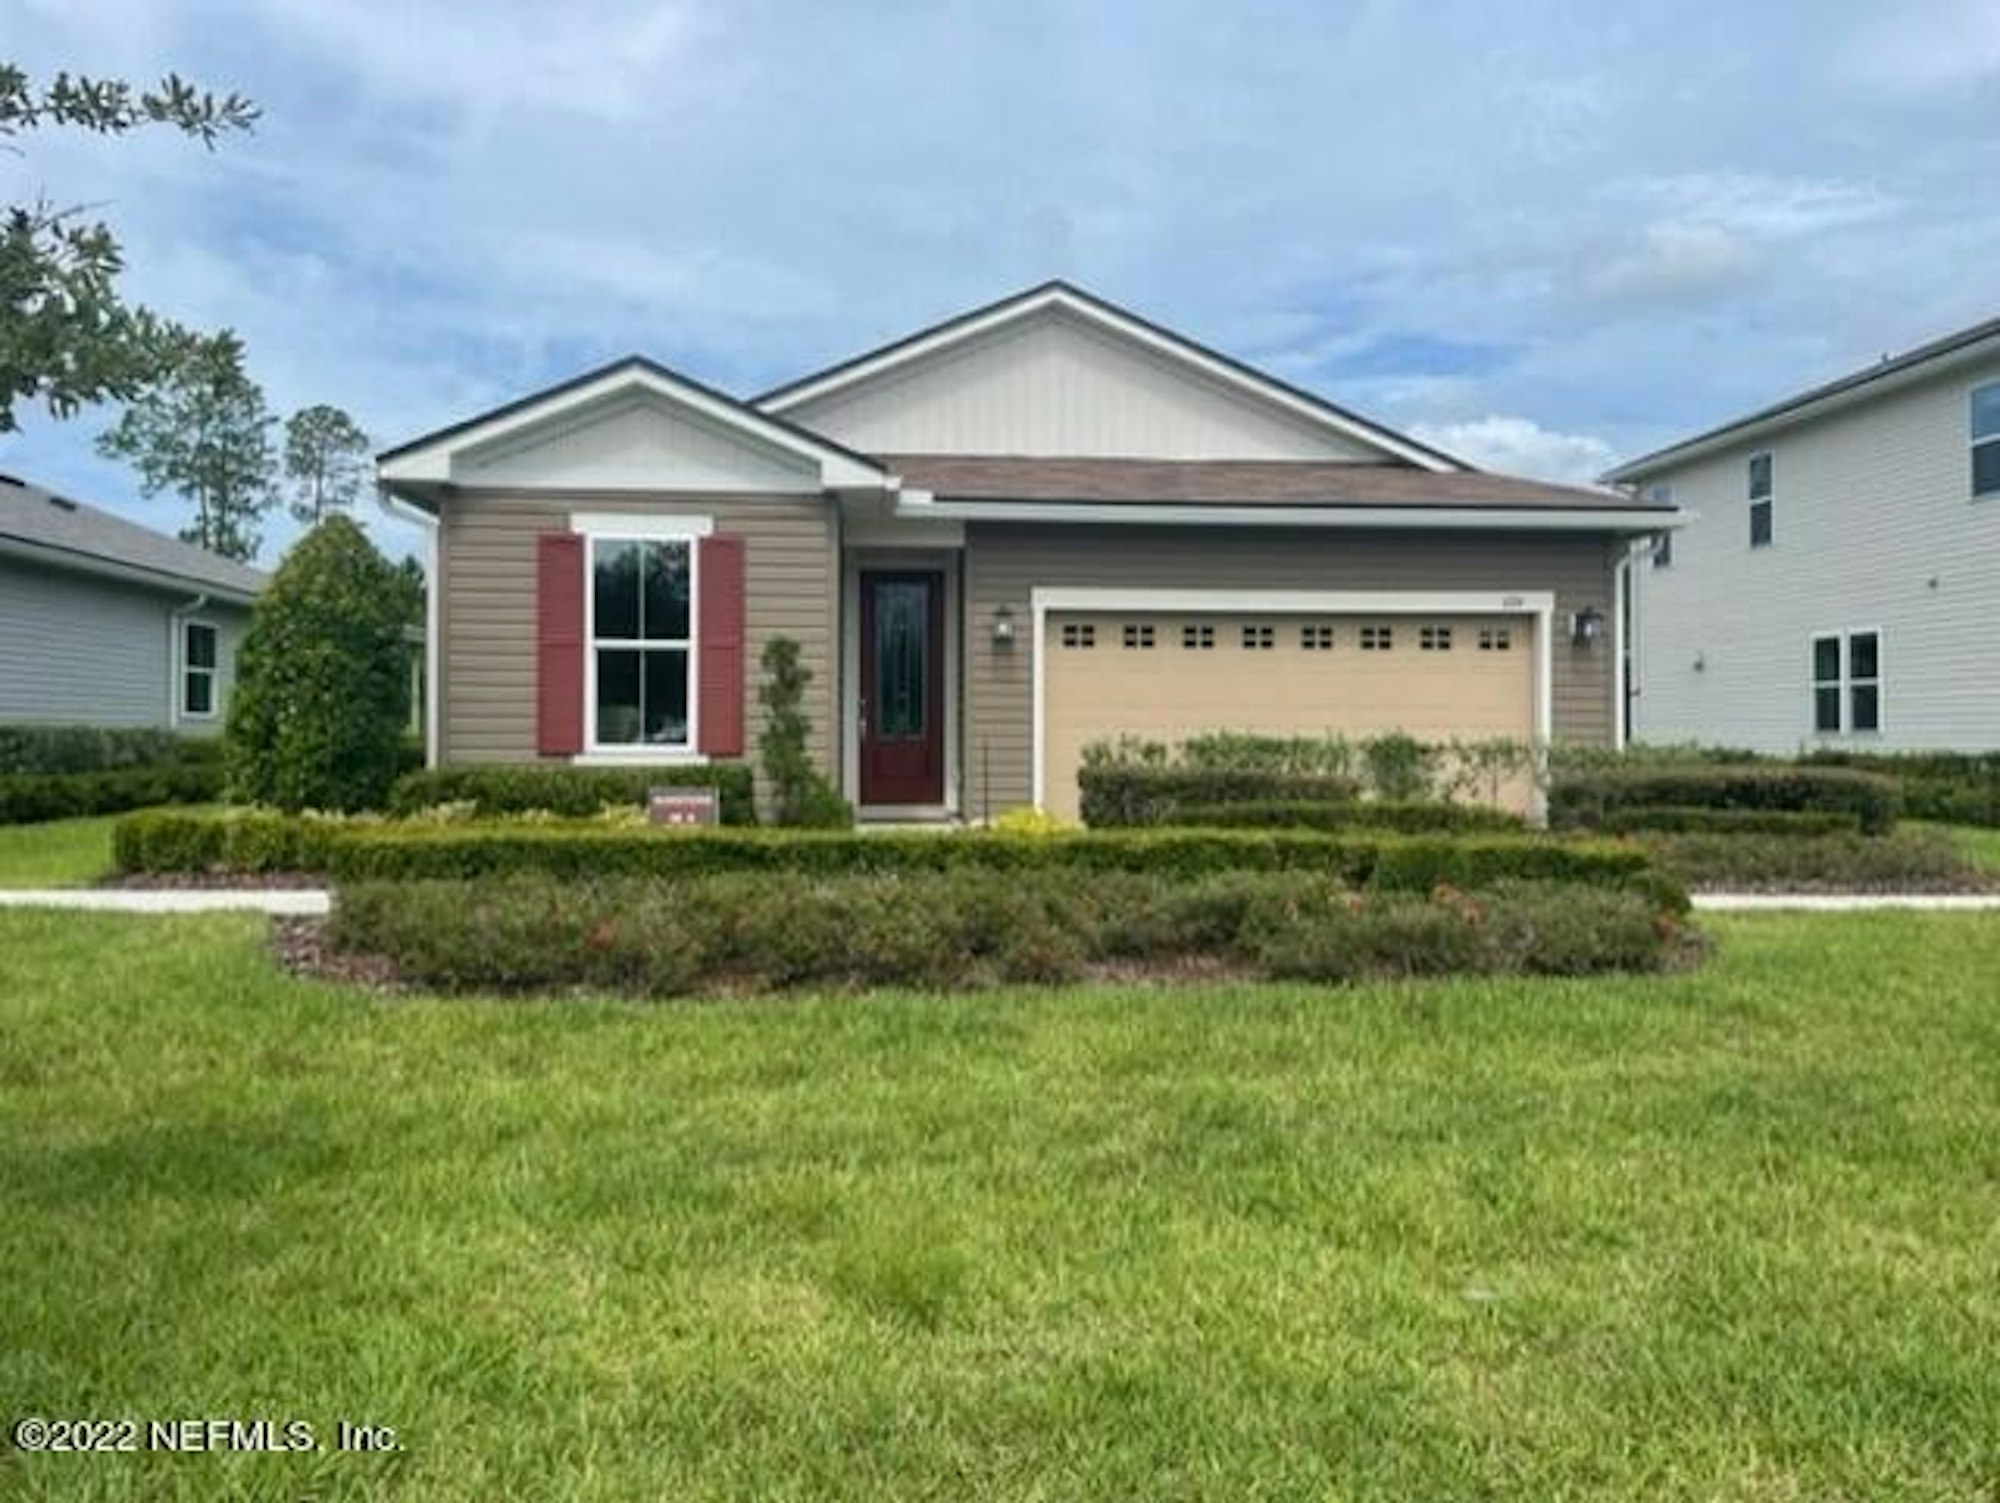 Photo 1 of 8 - 1124 Persimmon Dr, Middleburg, FL 32068